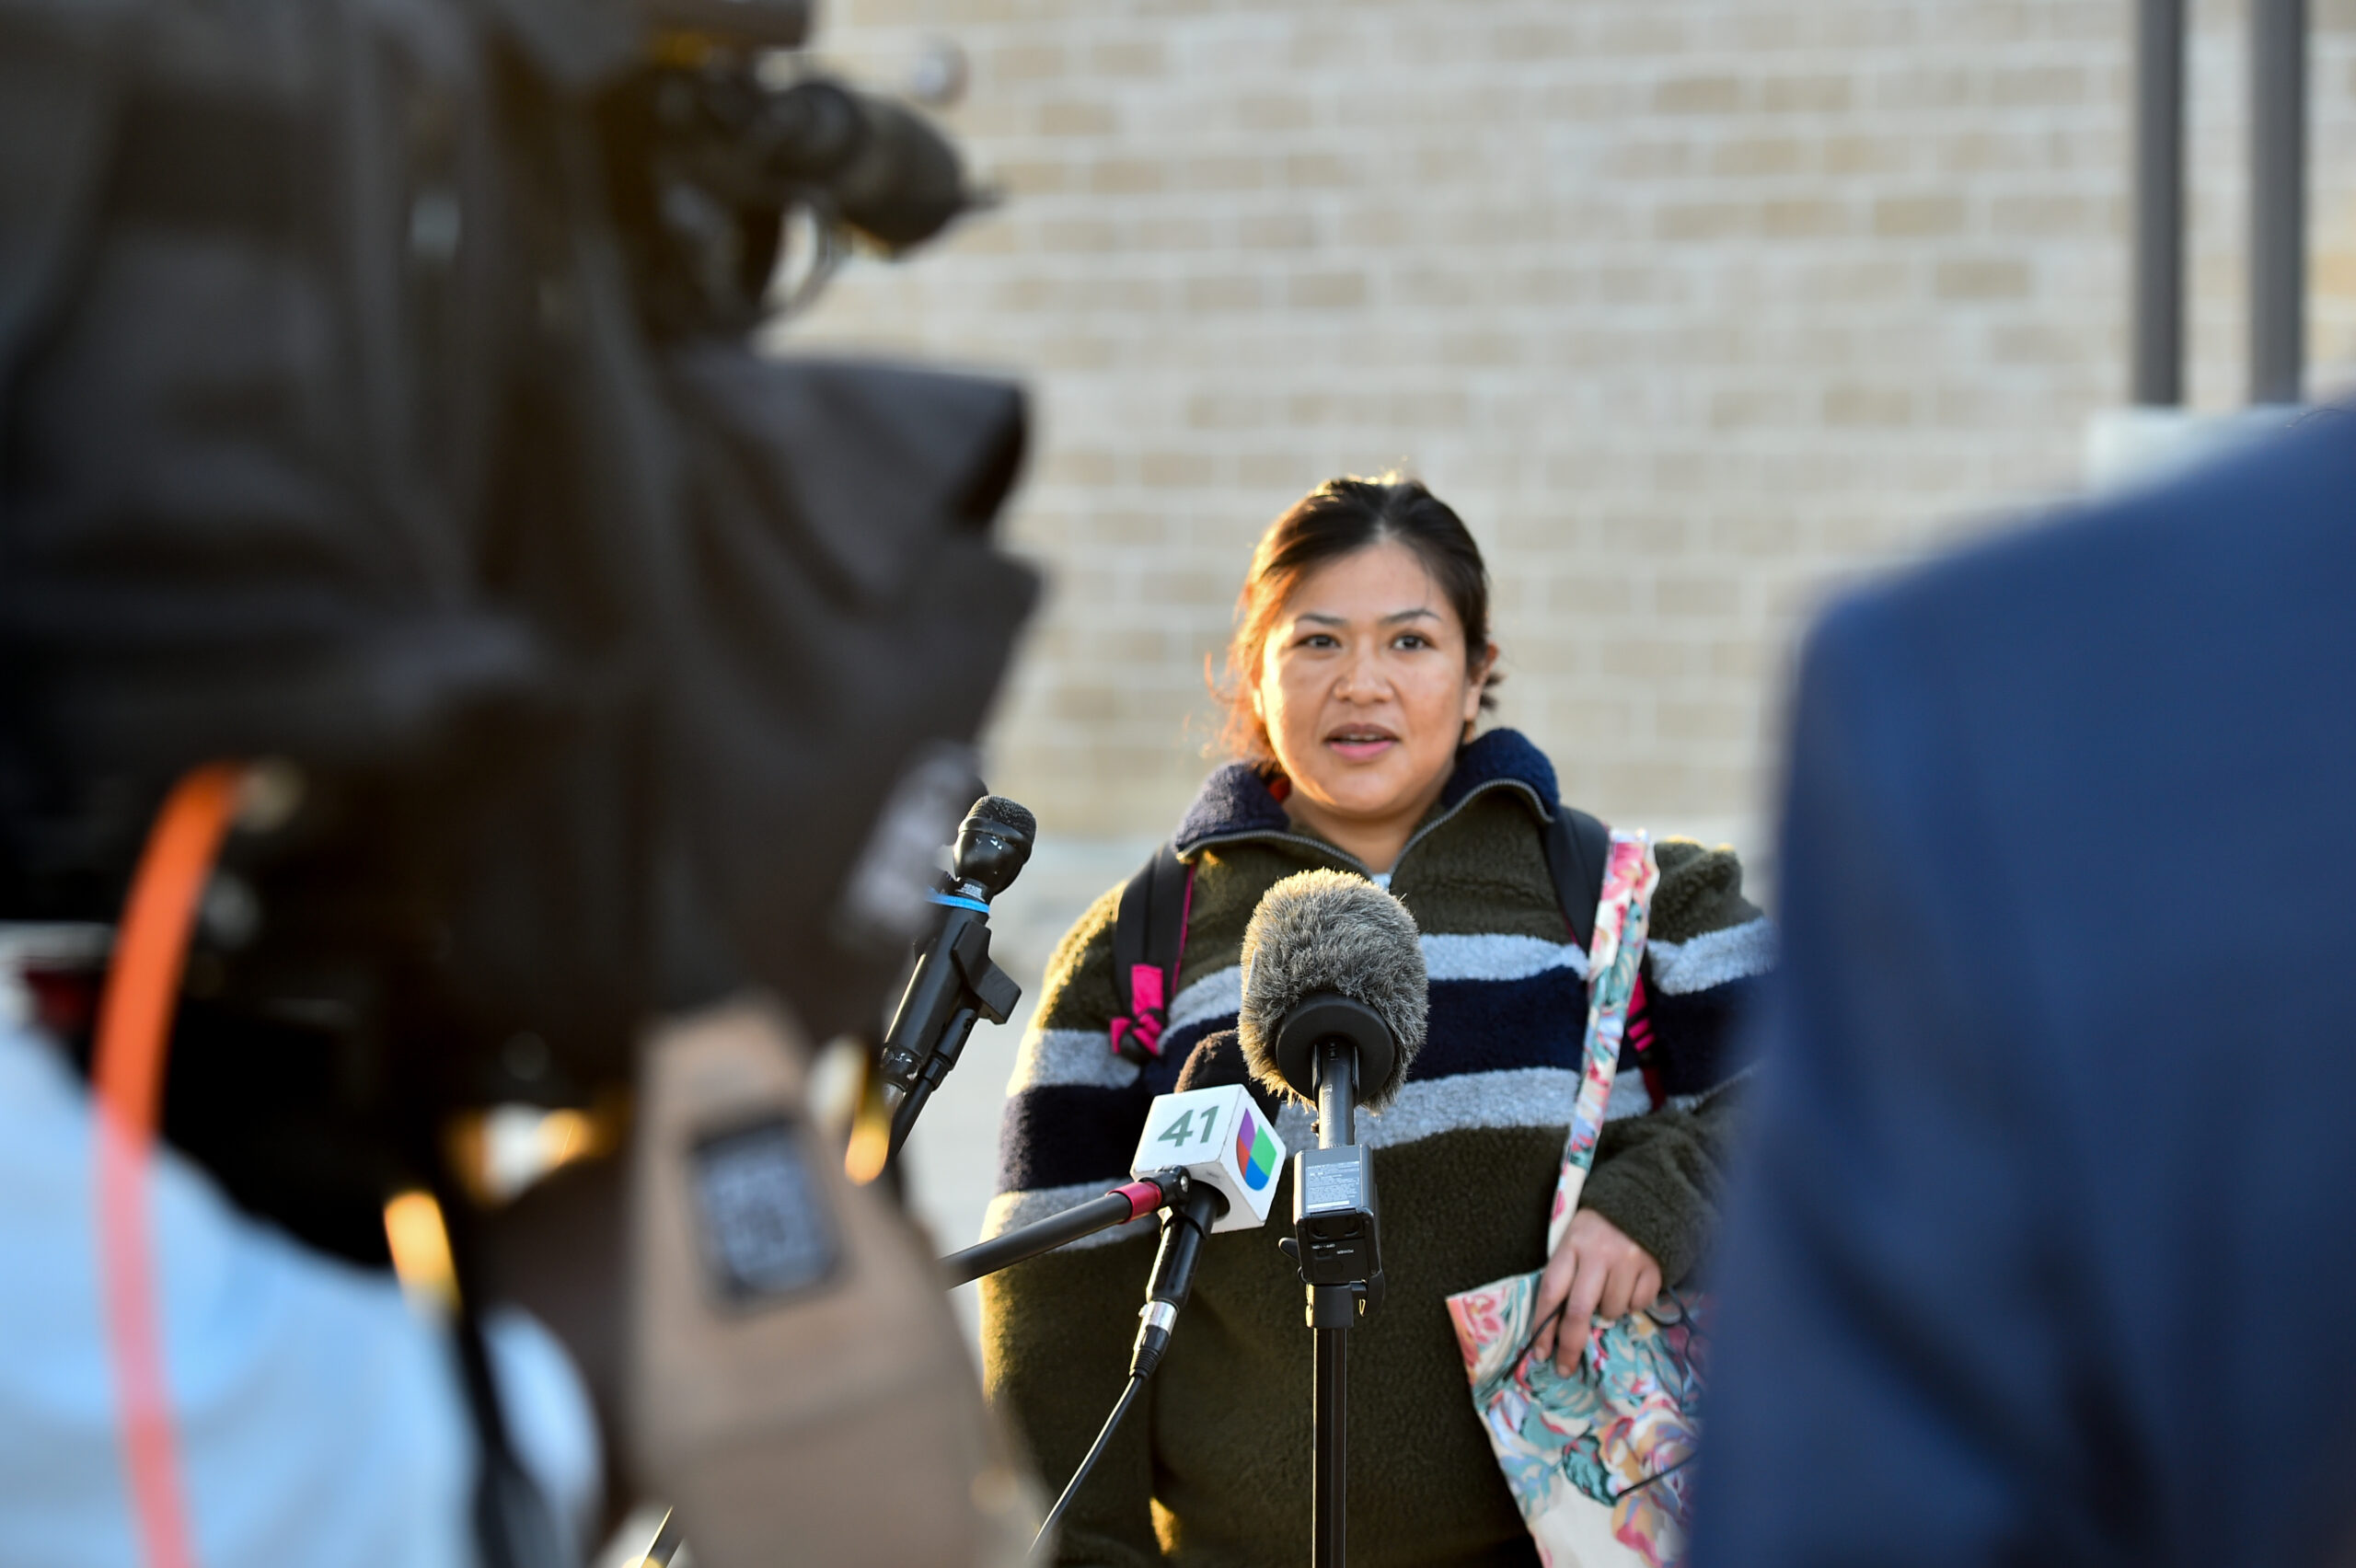 Rosa Jimenez speaking to the press following her release on Jan. 27, 2021. (Image: Robin Jerstad for the AP/Innocence Project